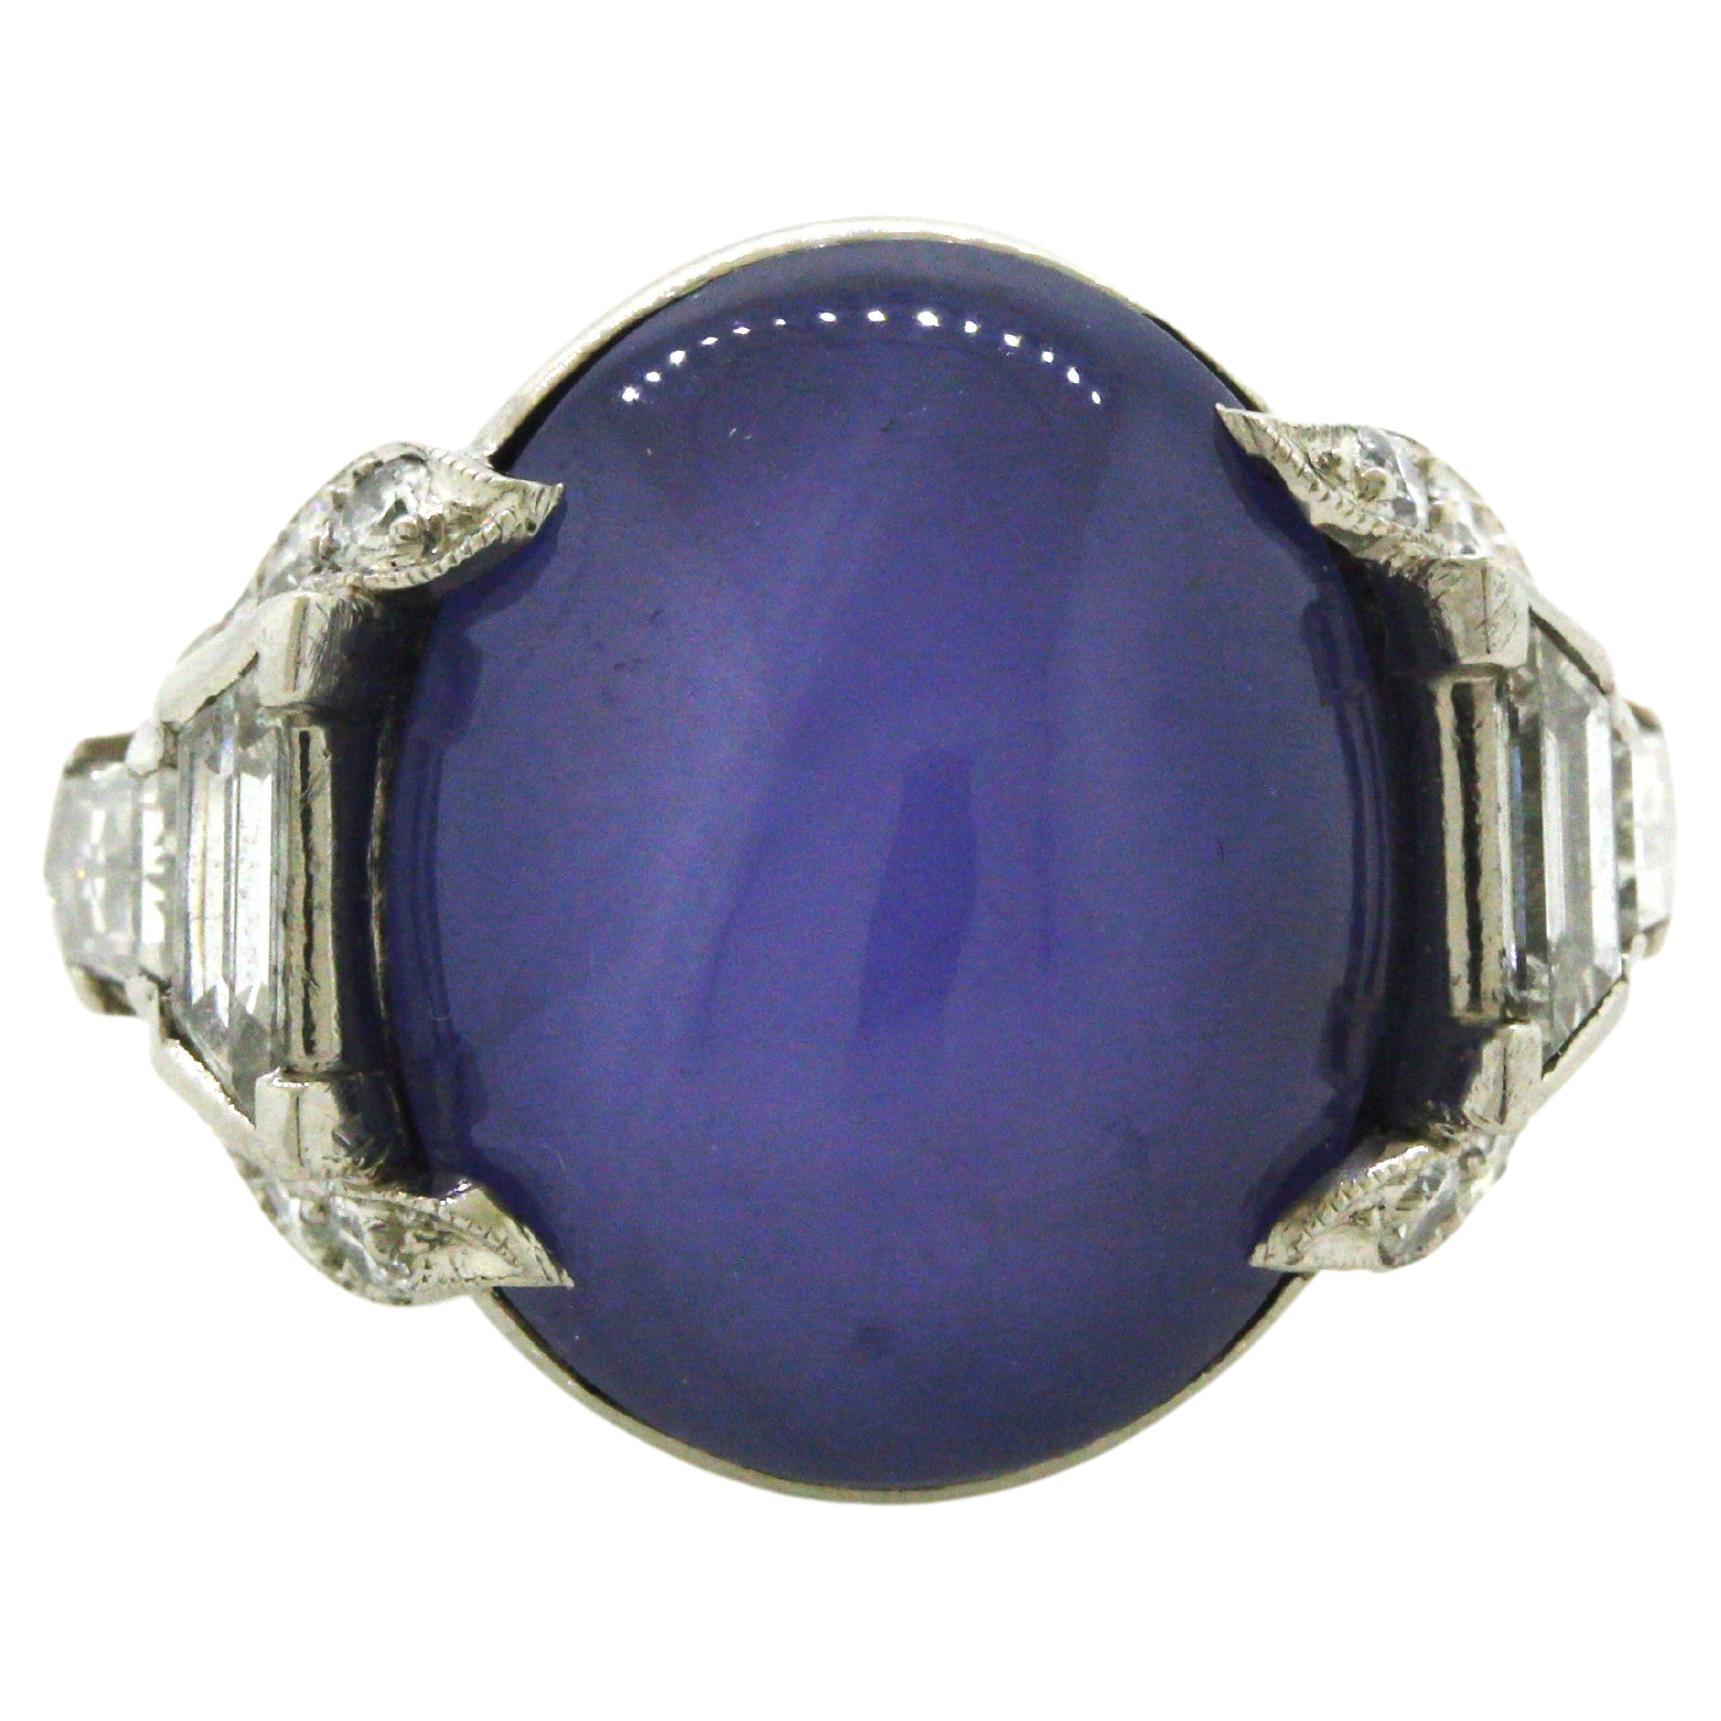 A beautiful Art Deco platinum ring made in the late 1920s. It features a blue star sapphire, weighing approximately 15 carats, which has a rich even violetish-blue color. It is complemented by 0.75 carats of bright white diamonds set on the sides of